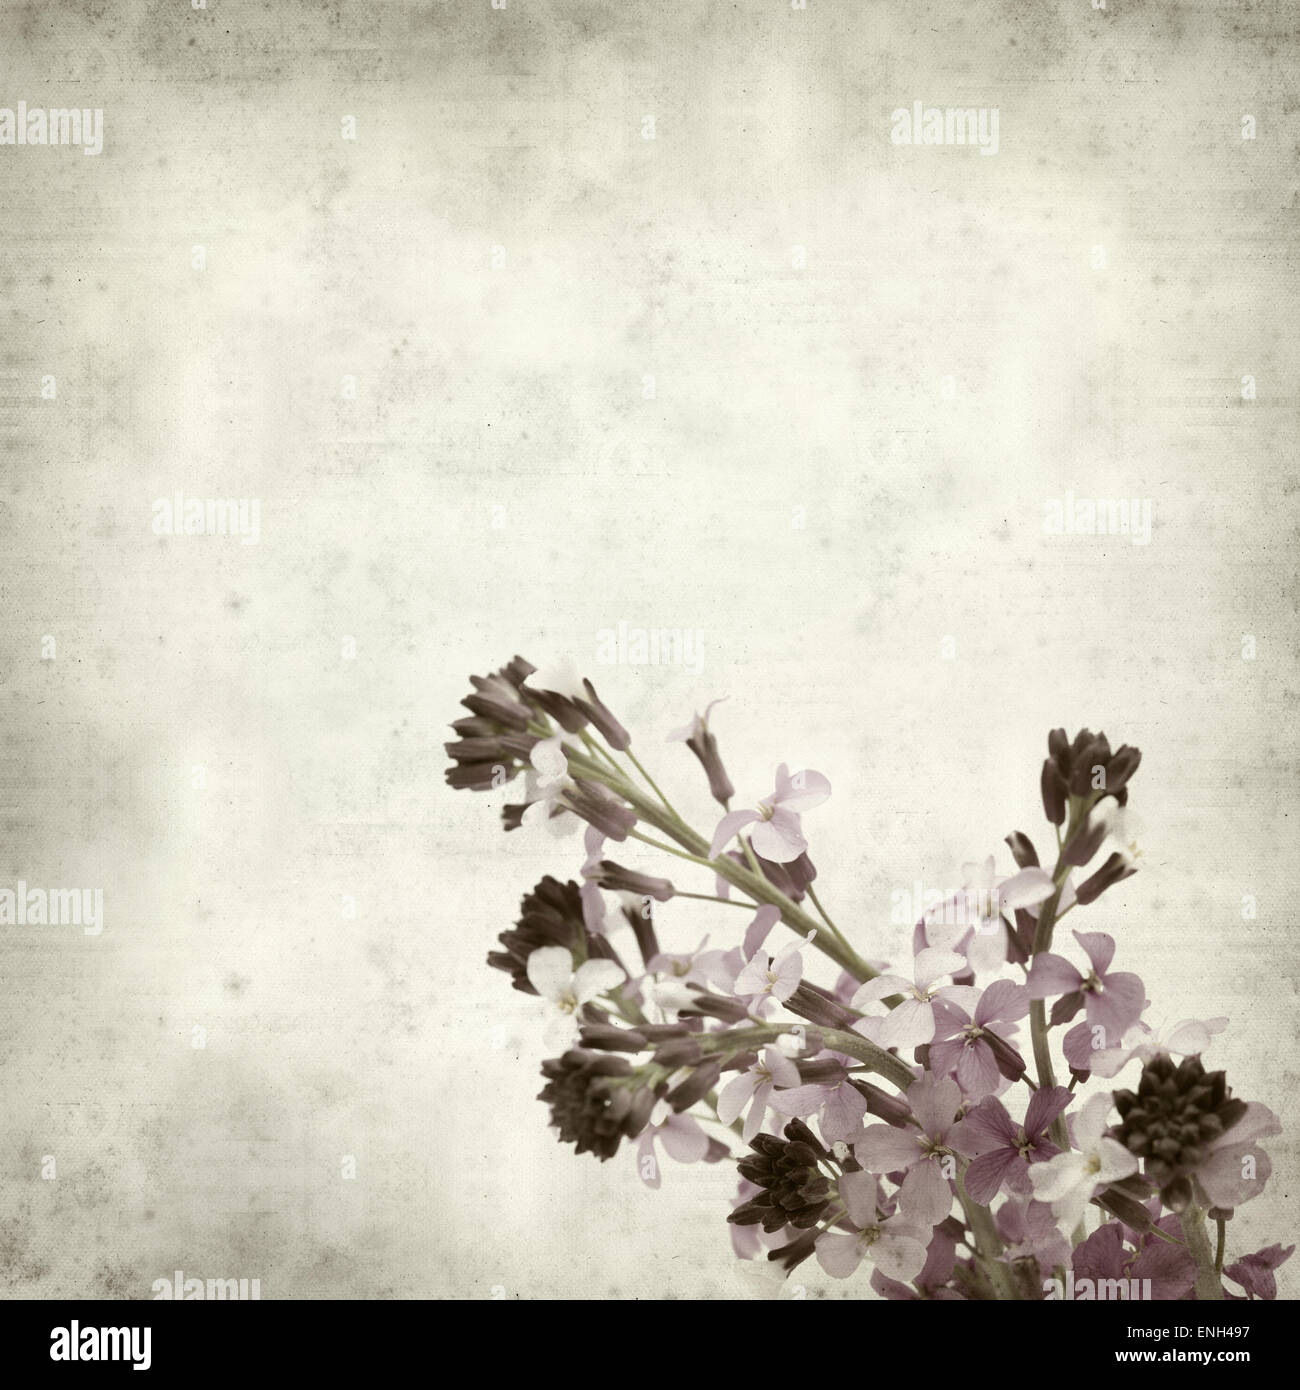 textured old paper background with Erysimum; scoparium, plant endemic to Gran Canaria Stock Photo